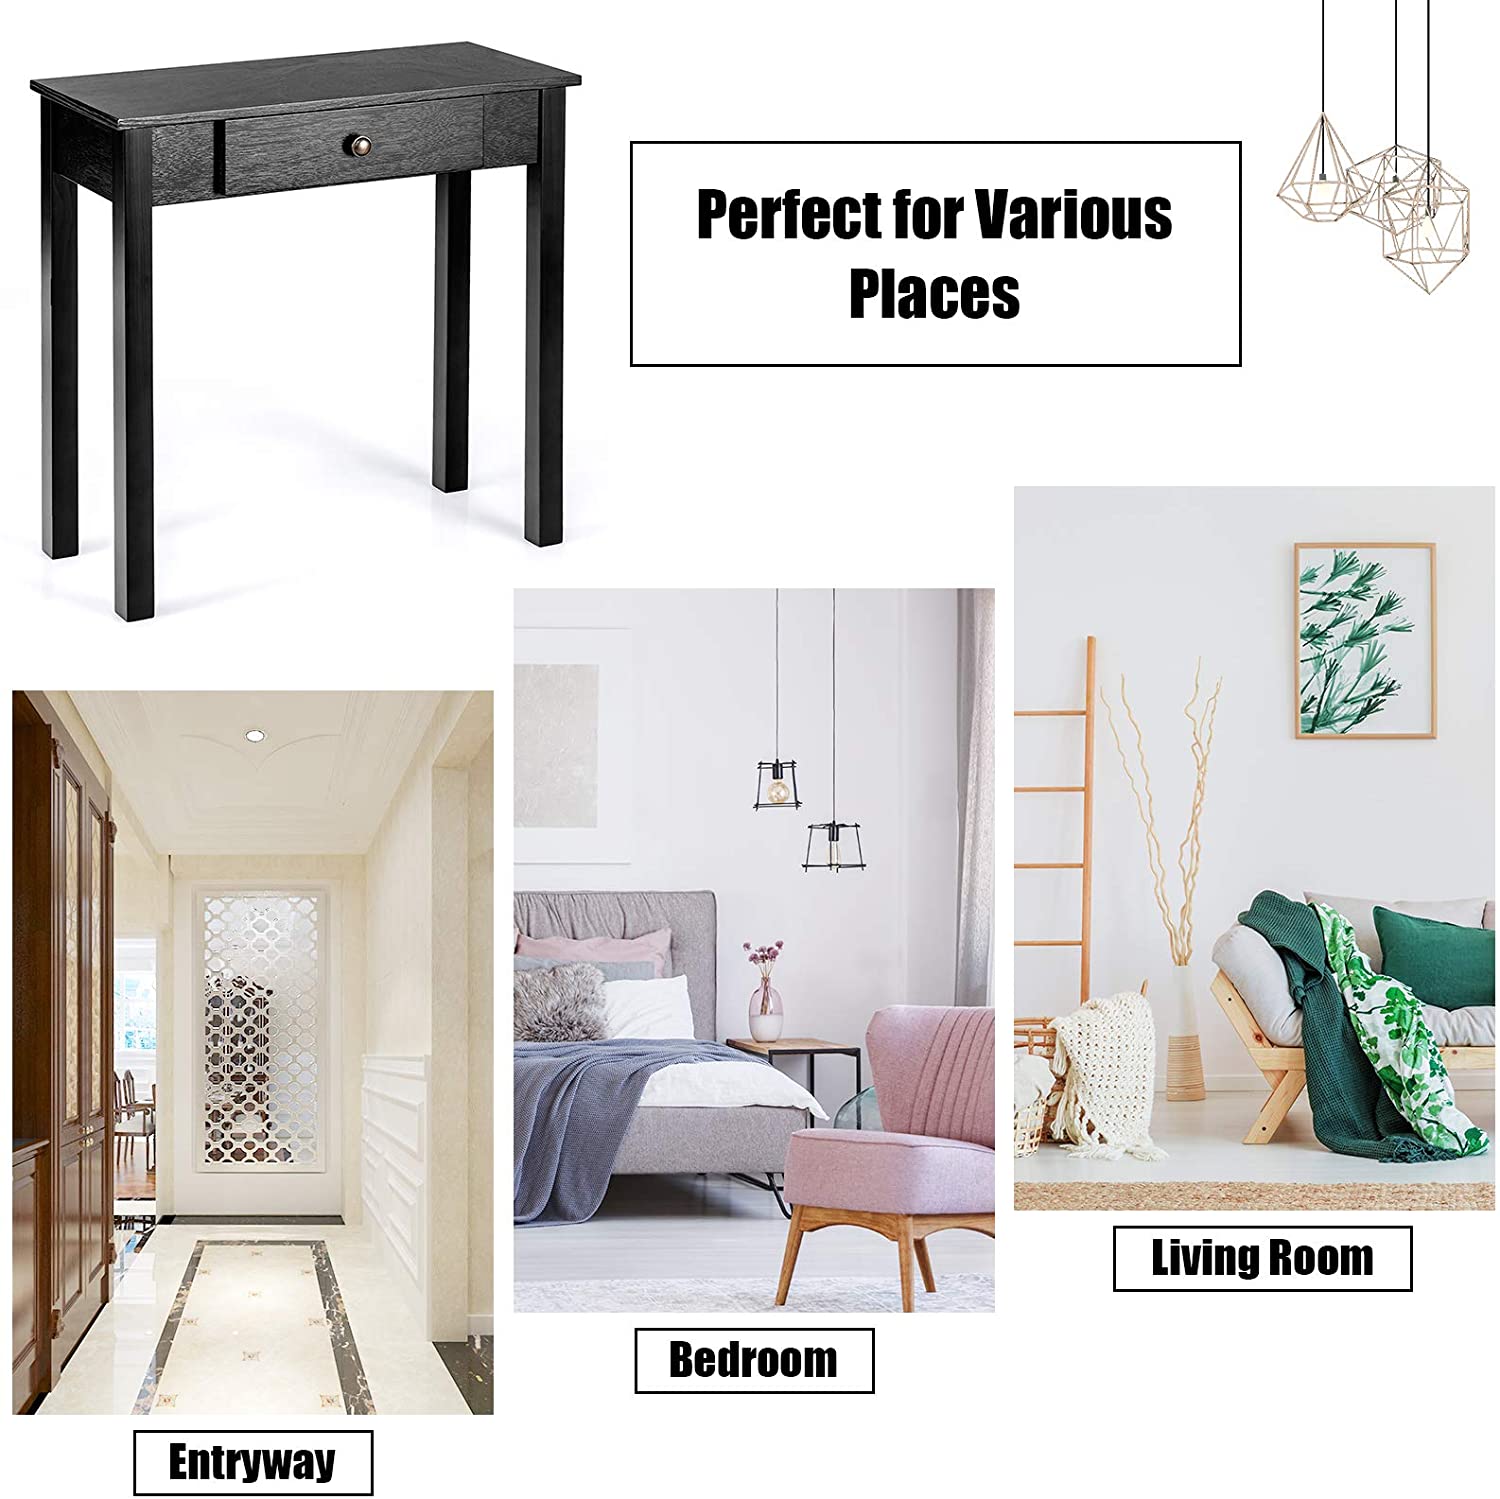 Bedroom Hallway, Small Space Simple and Modern living room table - Giantexus